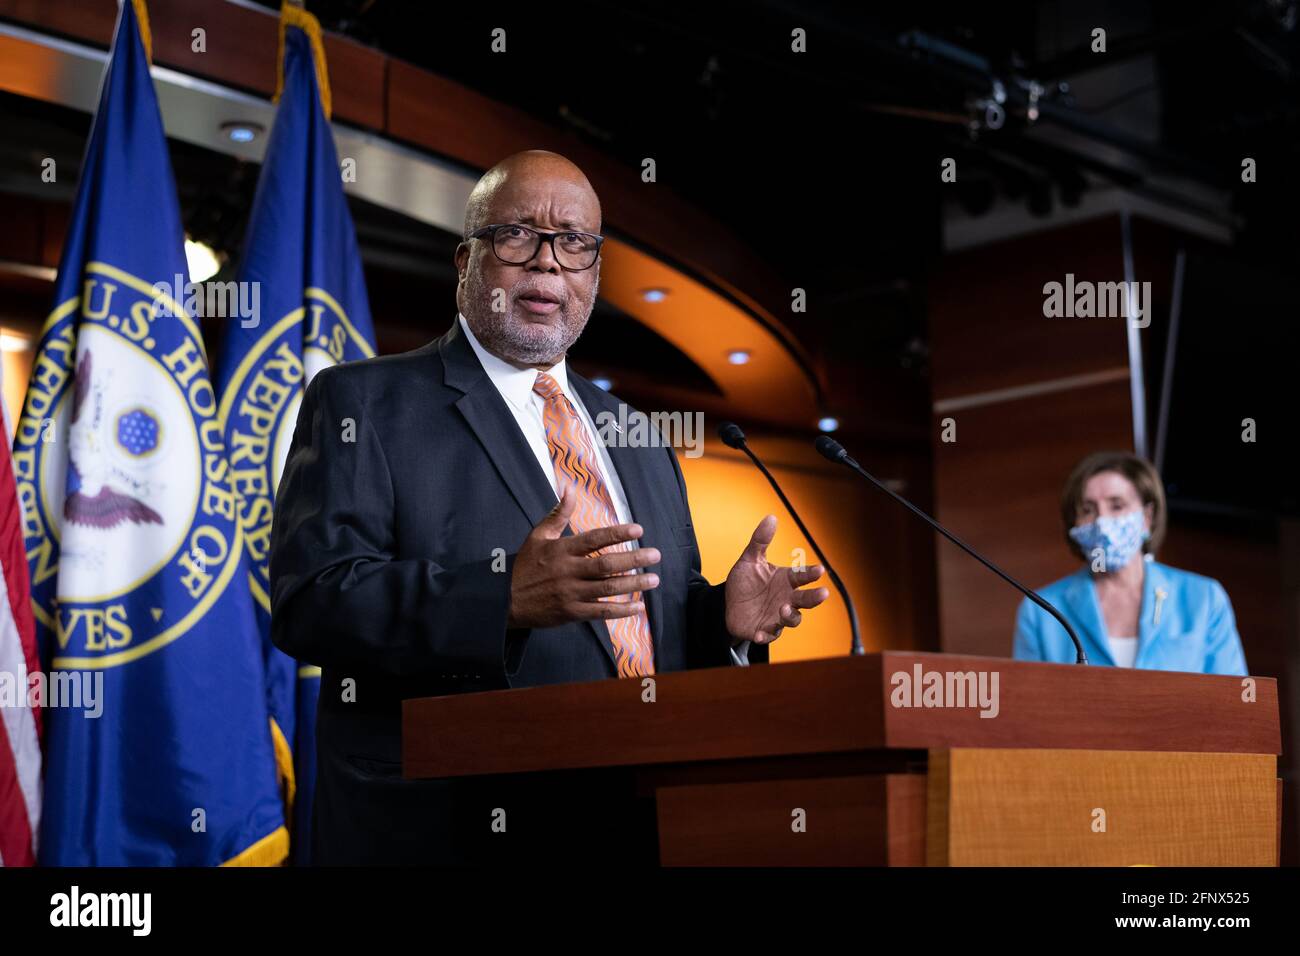 Washington, USA. 19th May, 2021. Representative Bennie Thompson (R-MS) during a press conference on the proposed January 6 commission, at the U.S. Capitol, in Washington, DC, on Wednesday, May 19, 2021. Amid debate over the scope of a proposed January 6 Commission within the Republican Party, today Minority Leader McConnell announced his opposition to the commission as it is expected to pass the House with bipartisan support. (Graeme Sloan/Sipa USA) Credit: Sipa USA/Alamy Live News Stock Photo